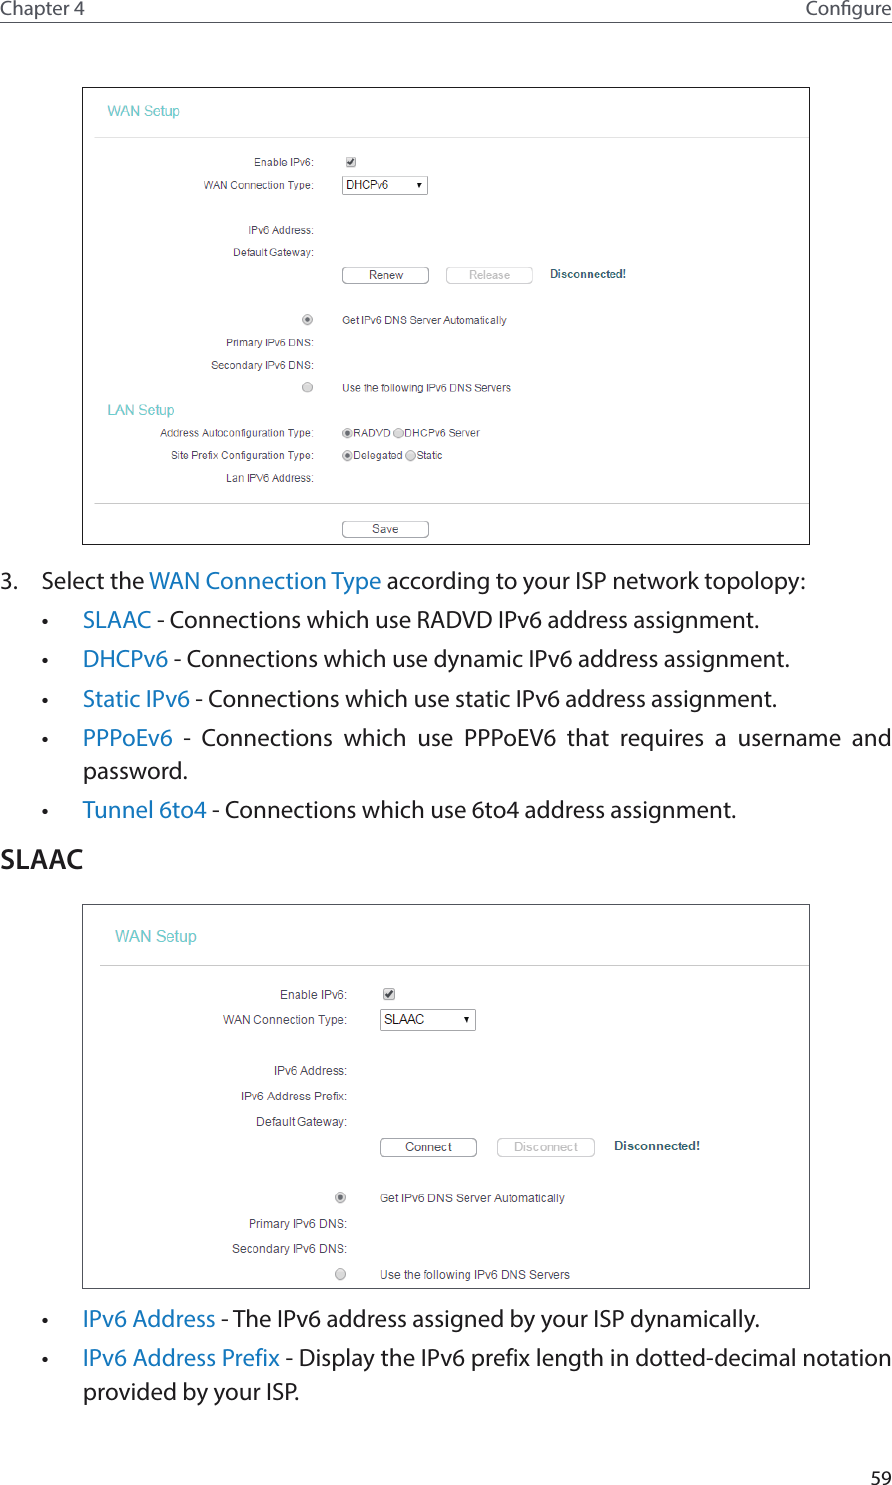 59Chapter 4 Congure3.  Select the WAN Connection Type according to your ISP network topolopy:•  SLAAC - Connections which use RADVD IPv6 address assignment.•  DHCPv6 - Connections which use dynamic IPv6 address assignment. •  Static IPv6 - Connections which use static IPv6 address assignment. •  PPPoEv6  - Connections which use PPPoEV6 that requires a username and password. •  Tunnel 6to4 - Connections which use 6to4 address assignment.SLAAC•  IPv6 Address - The IPv6 address assigned by your ISP dynamically.•  IPv6 Address Prefix - Display the IPv6 prefix length in dotted-decimal notation provided by your ISP.